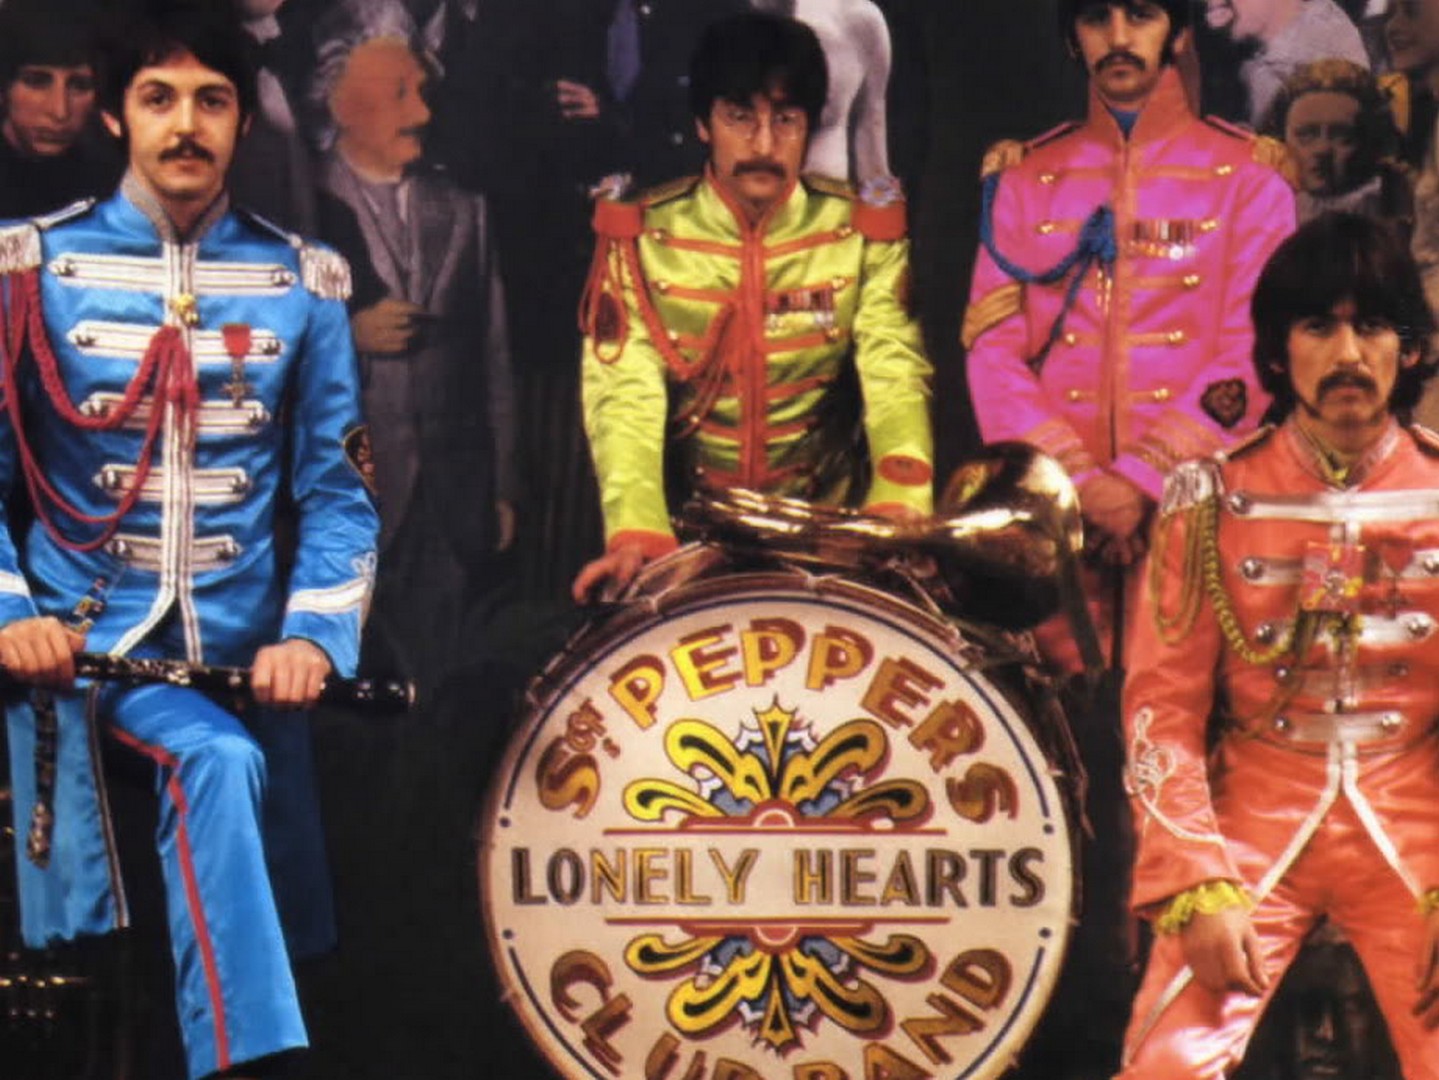 Beatles sgt peppers lonely hearts club. The Beatles сержант Пеппер. Sgt Pepper's Lonely Hearts Club Band. The Beatles Sgt. Pepper's Lonely Hearts Club Band 1967. The Beatles Sgt Pepper оркестр 1967.